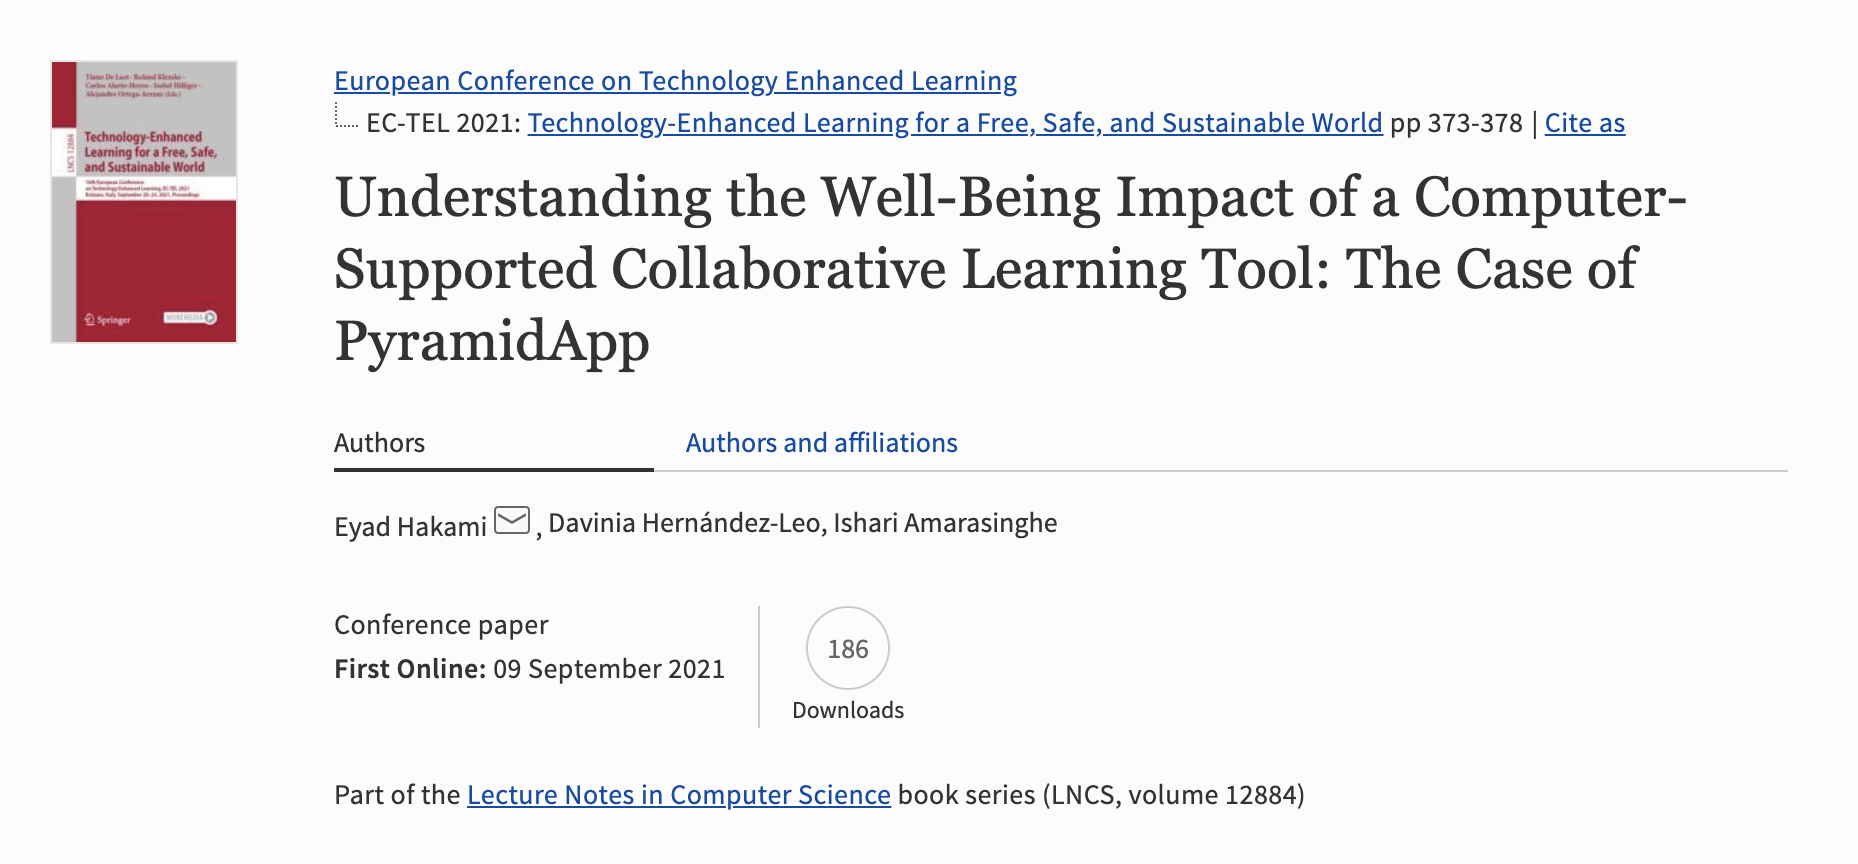 ECTEL2021 paper: Understanding the Well-Being Impact of a Computer-Supported Collaborative Learning Tool: The Case of PyramidApp